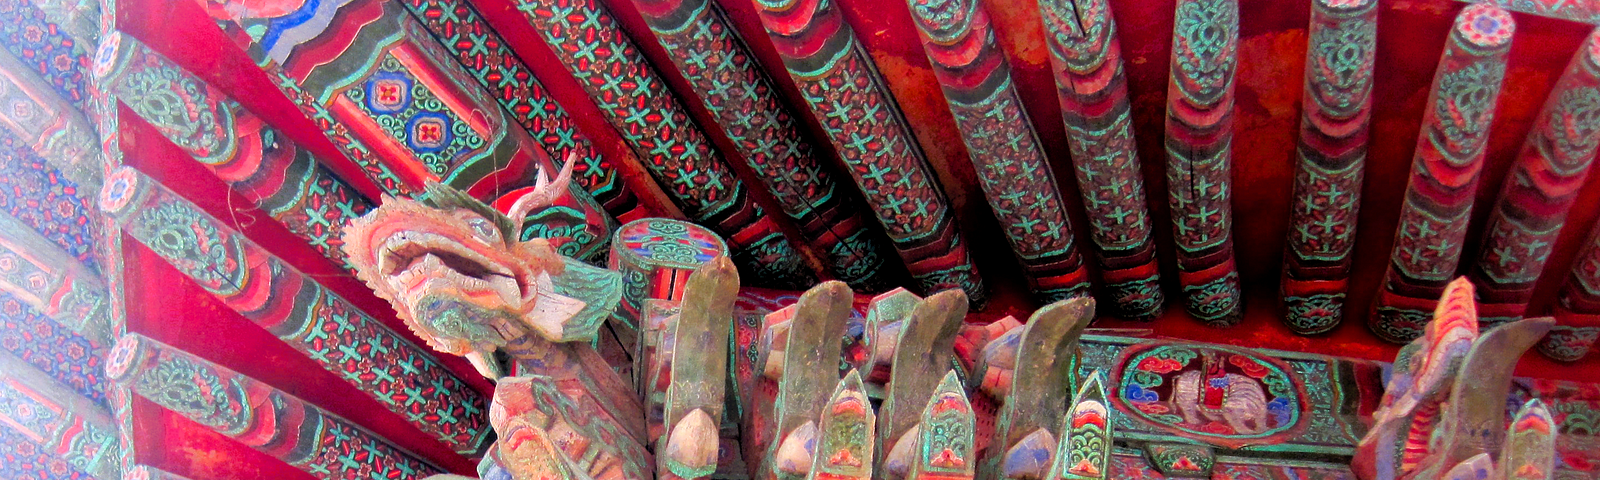 Colorful dragons on corners of roof in Buddhist temple